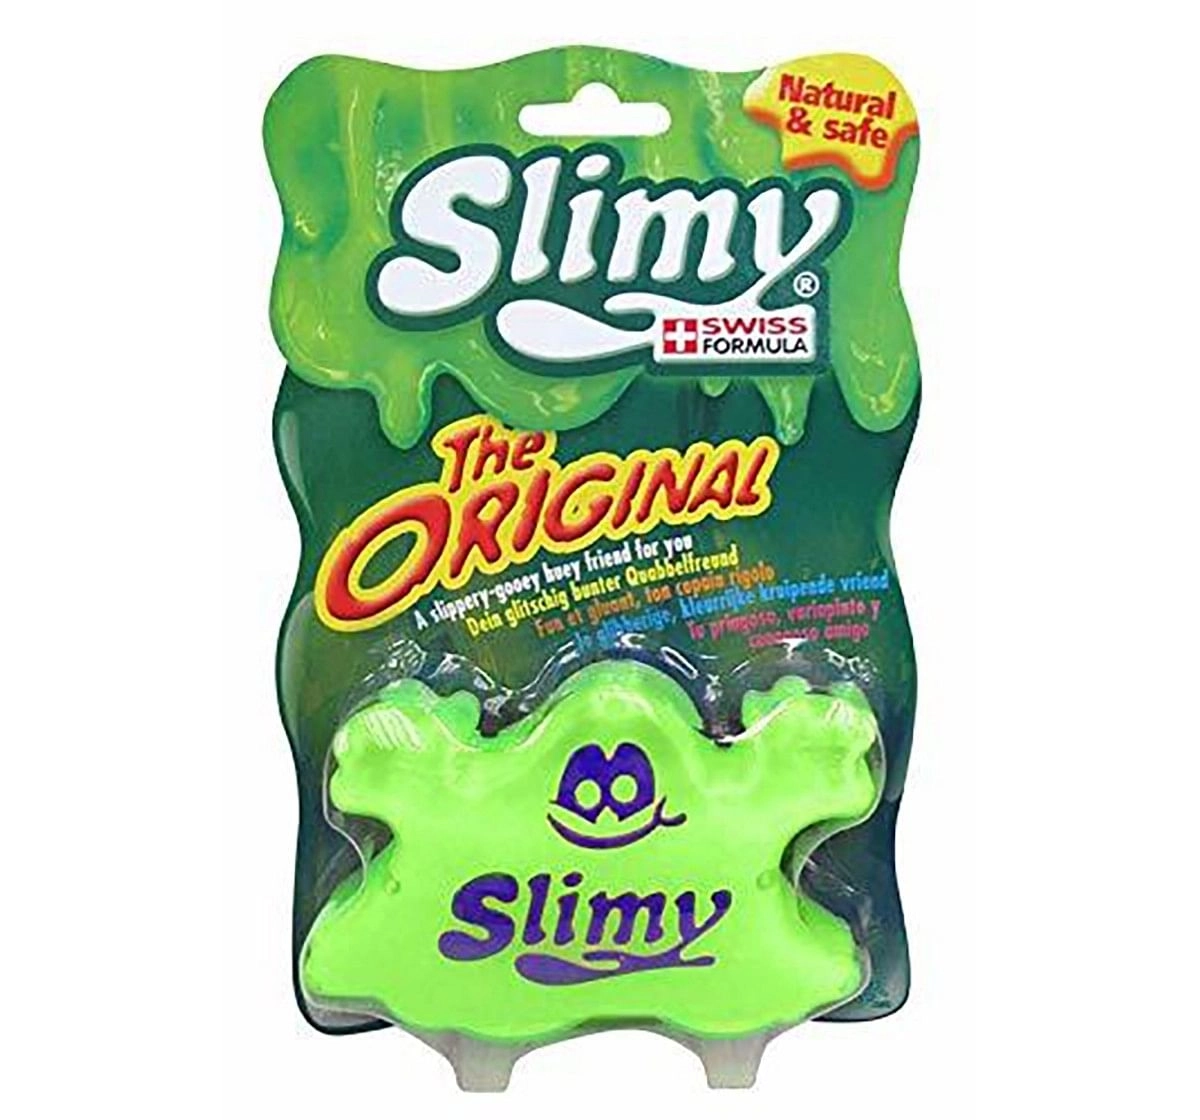 Slimy Swiss Fruity Slime Collection - Blister Card Sand, & Others for Kids age 3Y+ 